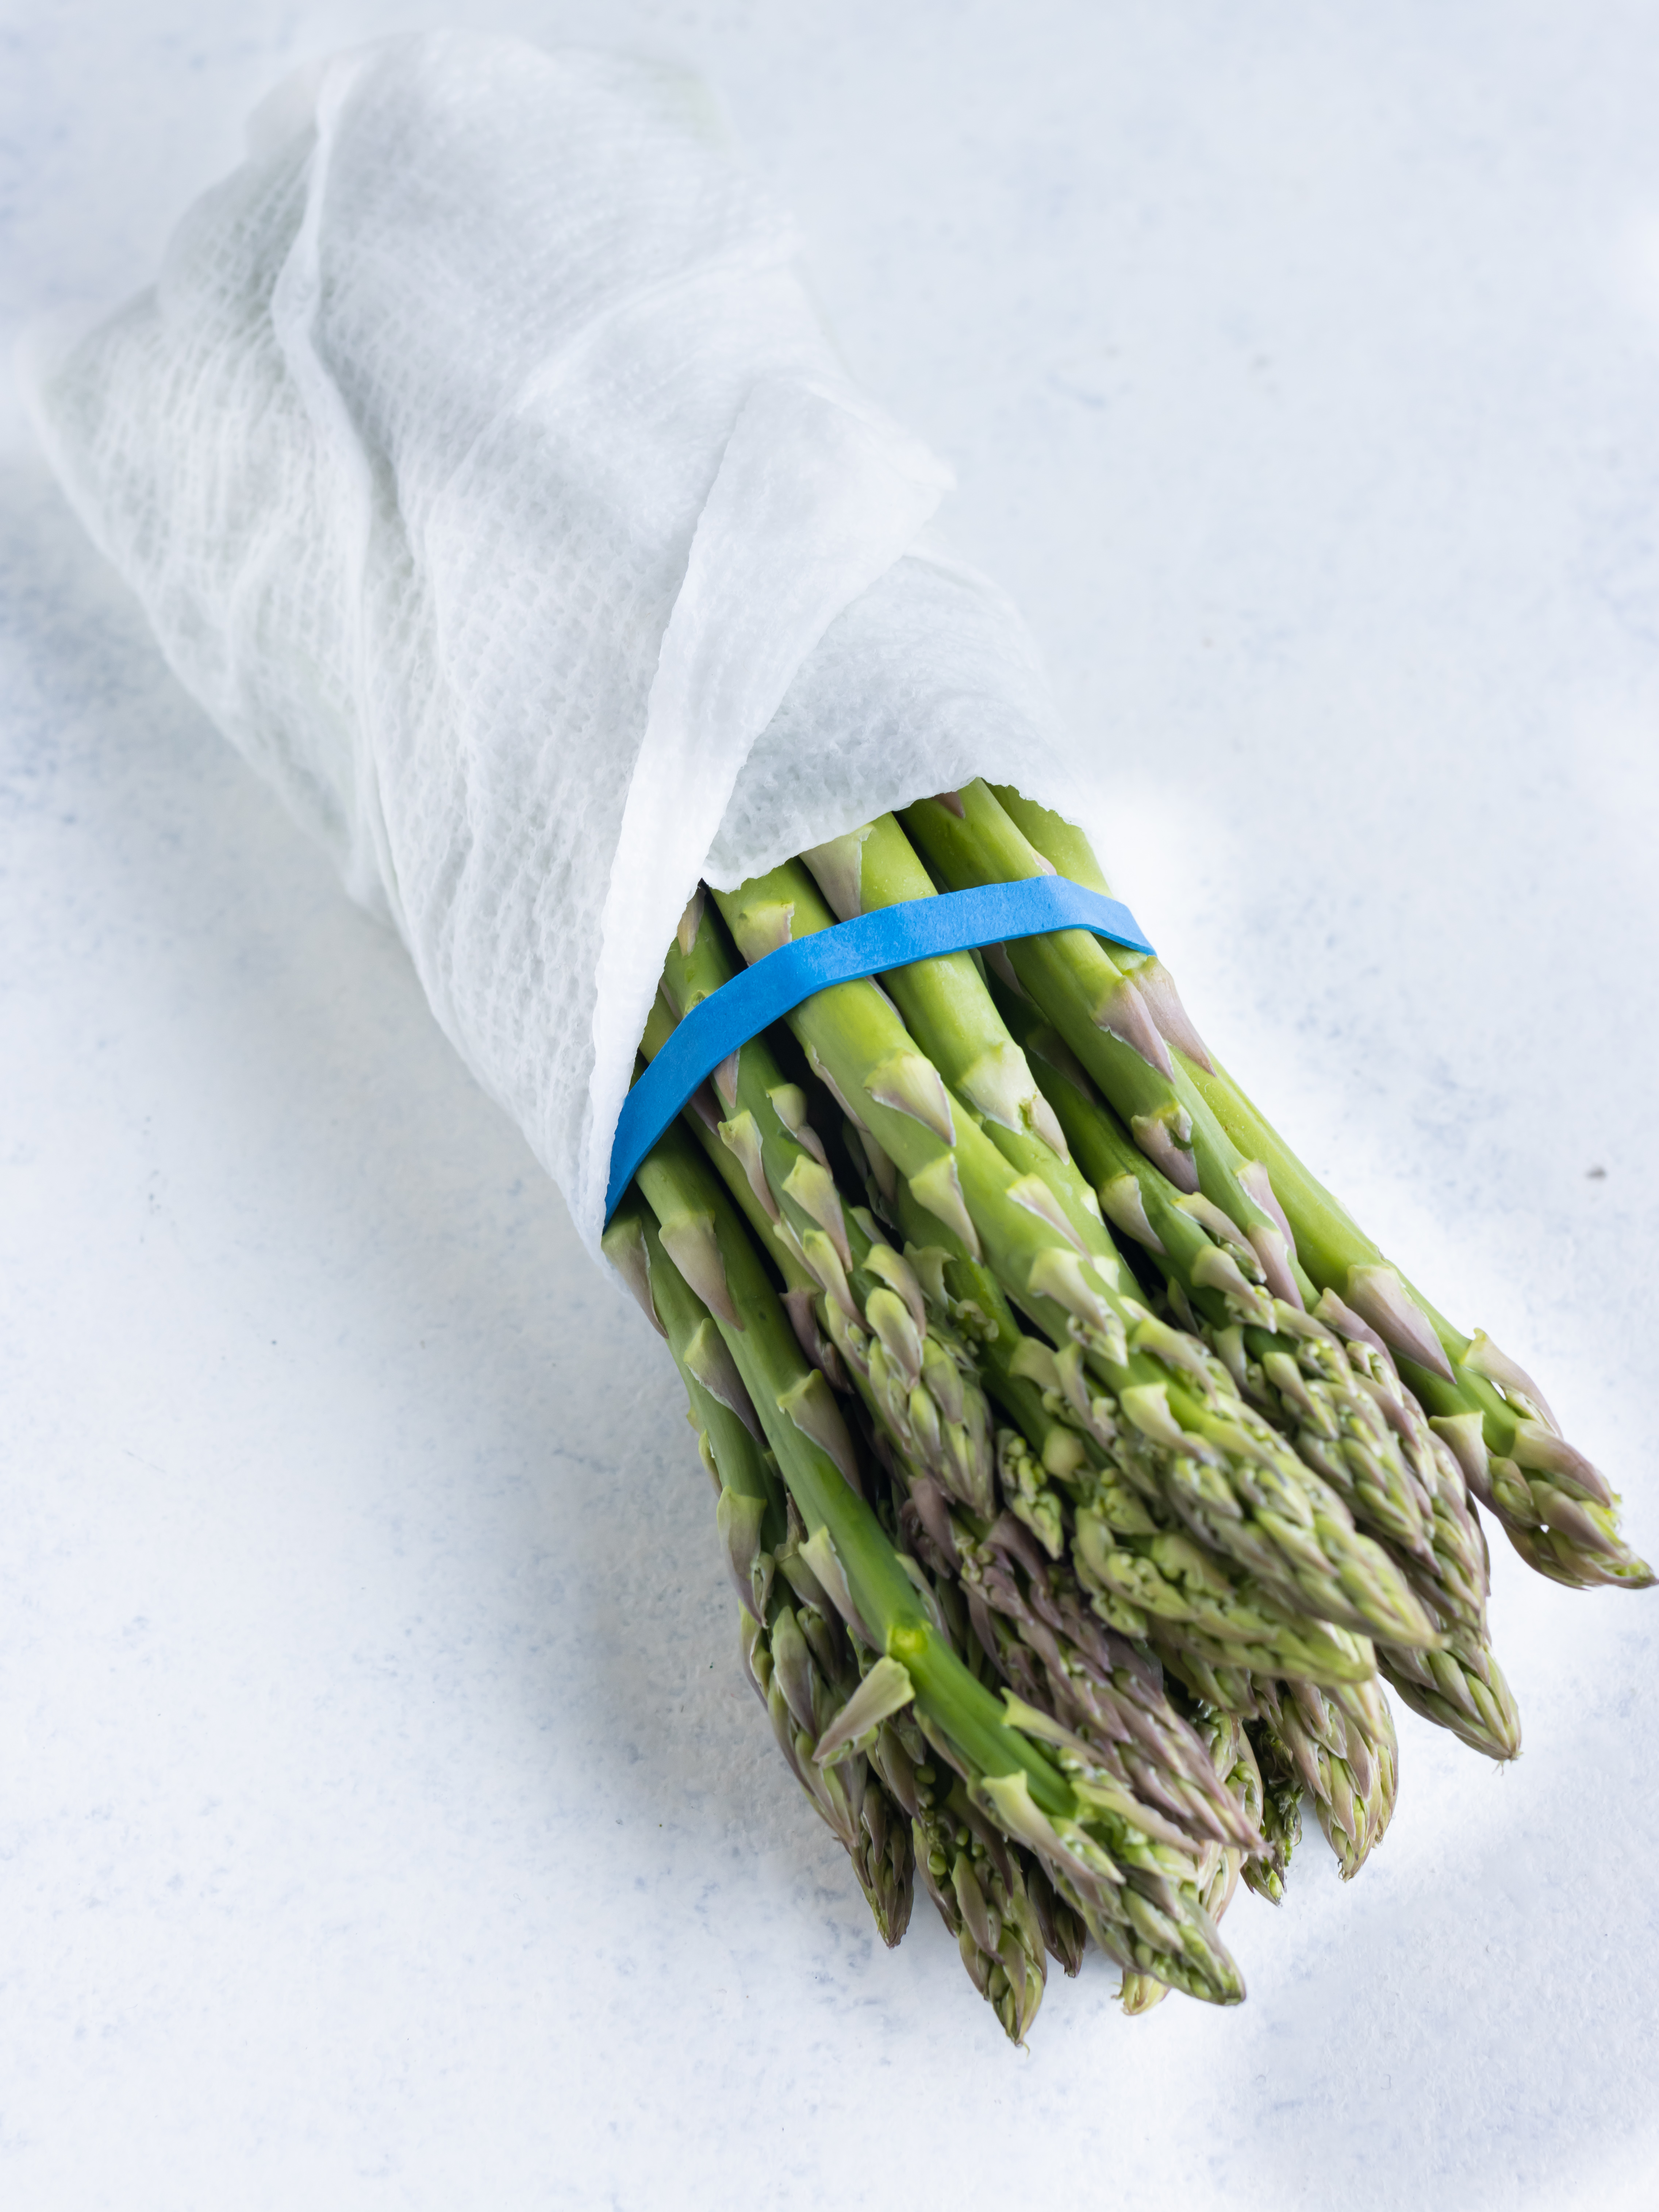 One bunch of asparagus wrapped in a damp paper towel.